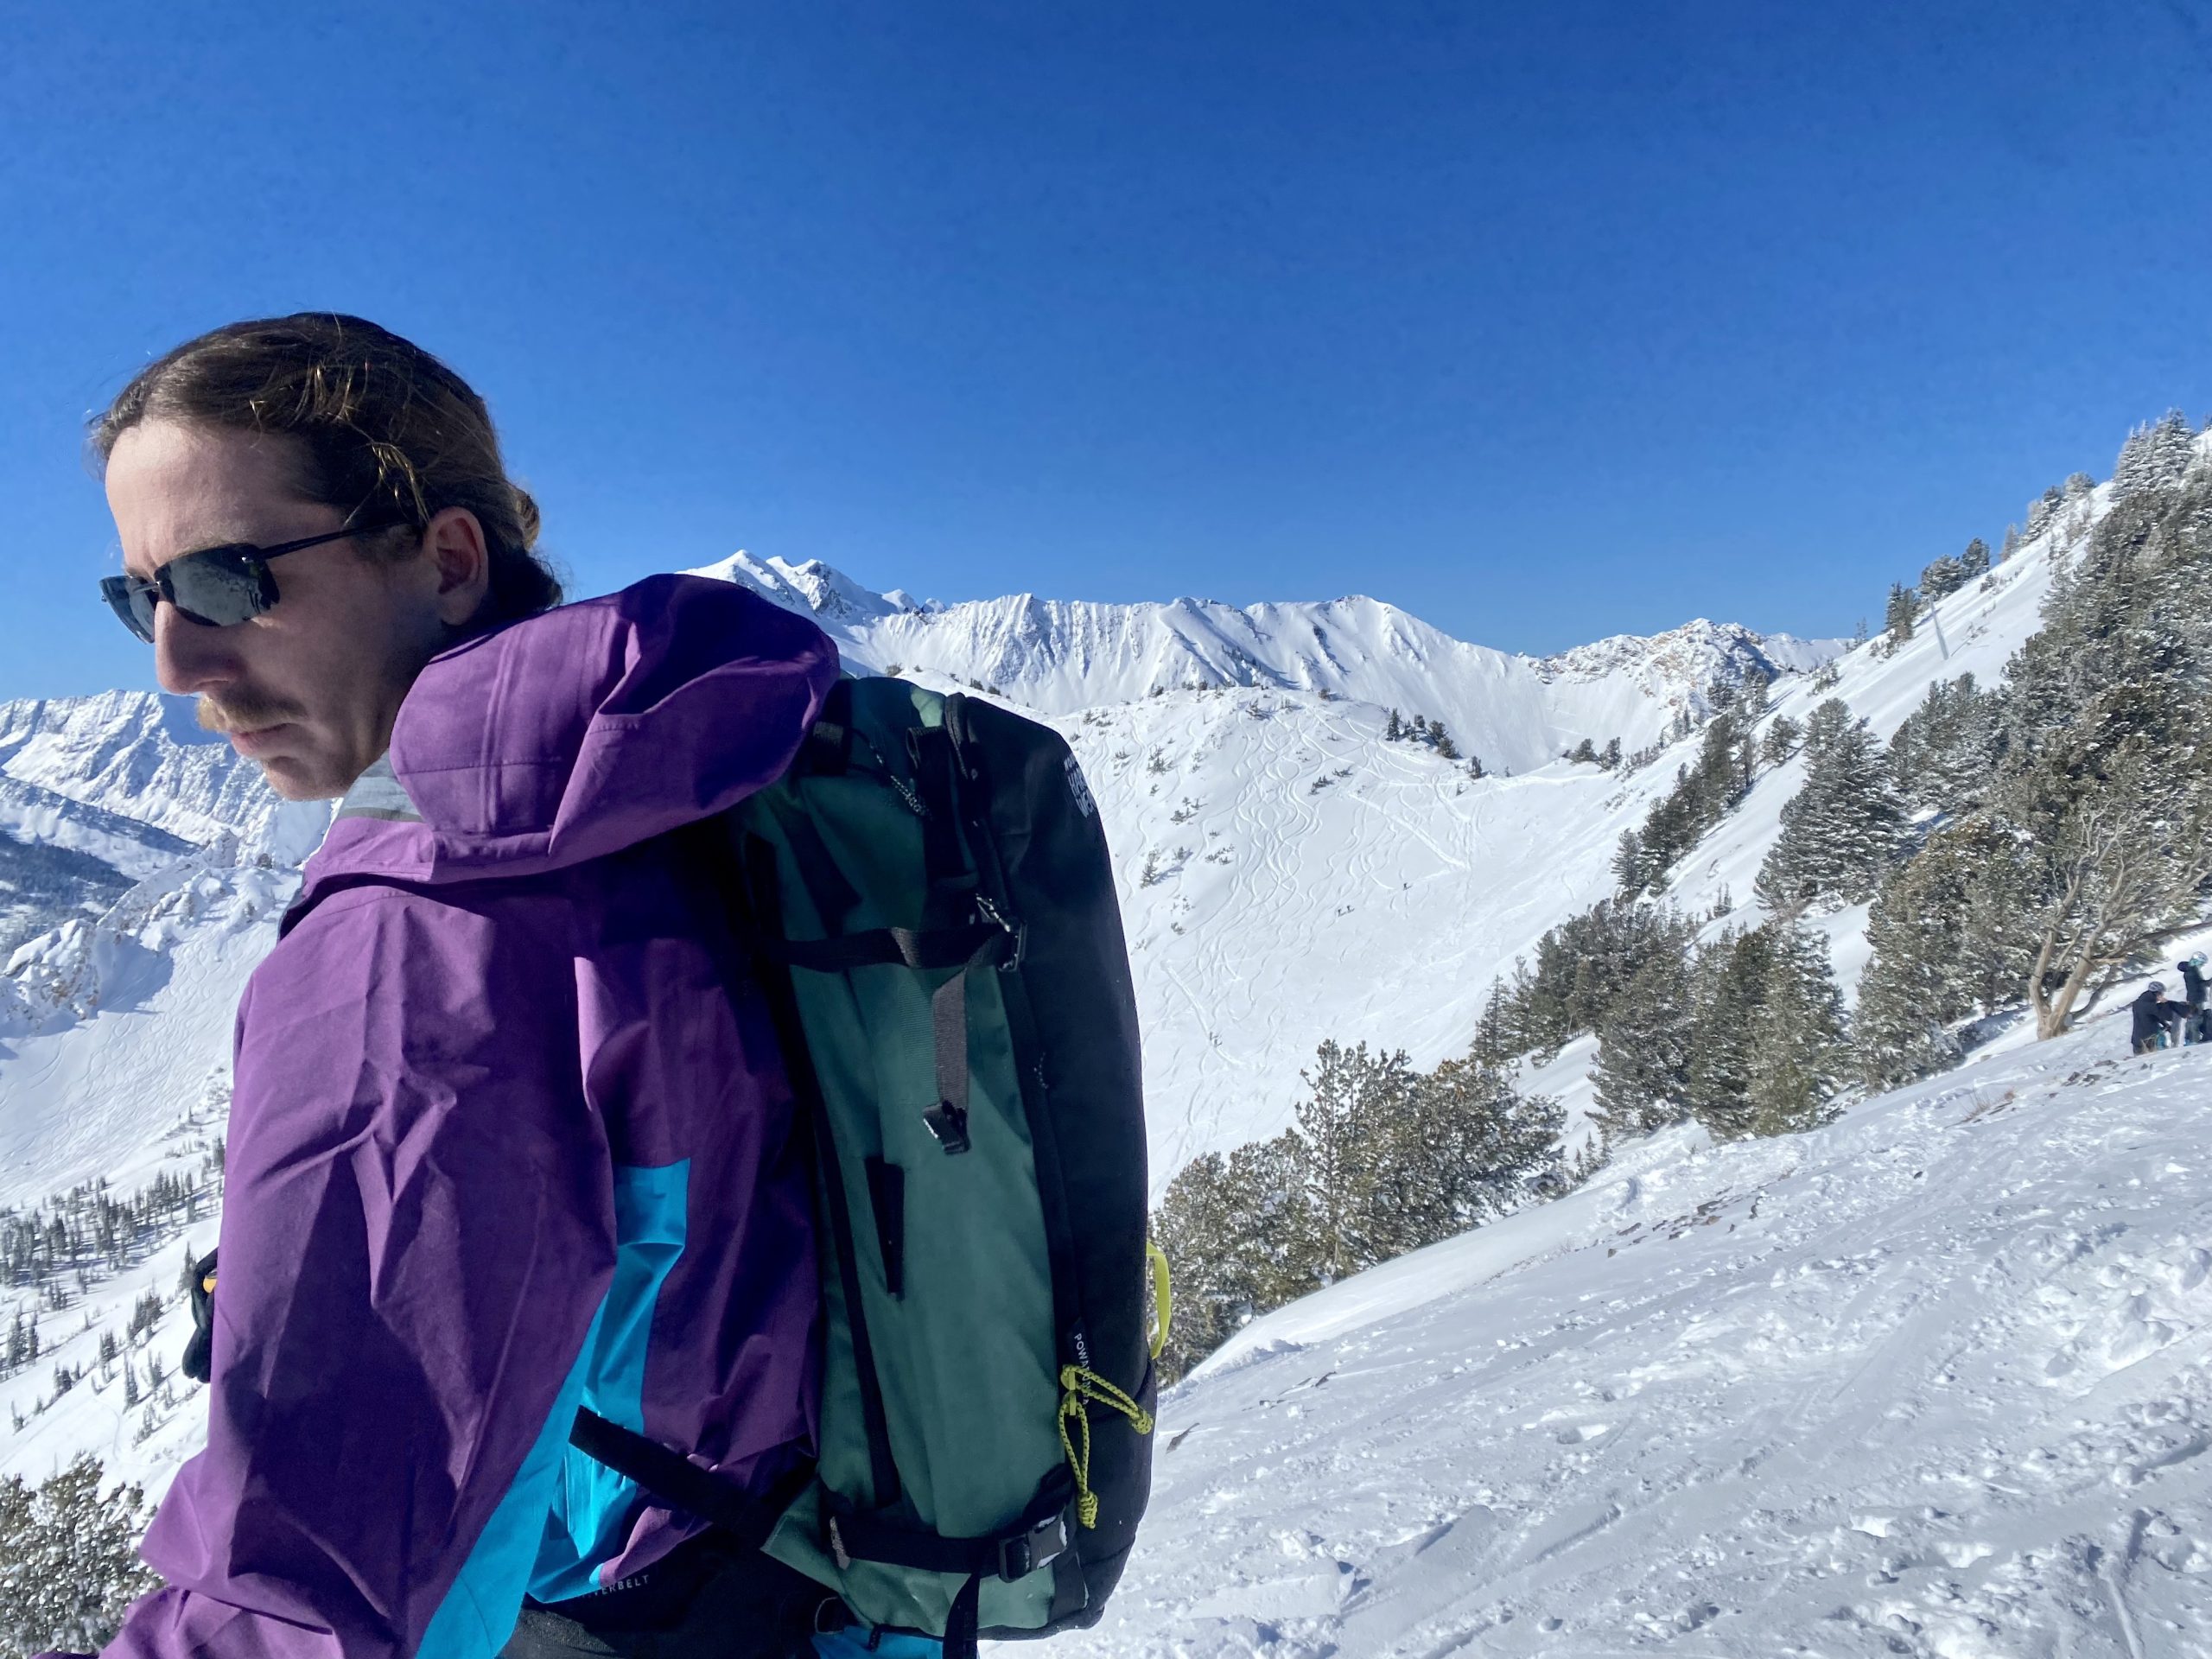 GEAR REVIEW] Why I Chose Mountain Hardwear for My Jacket, Gloves